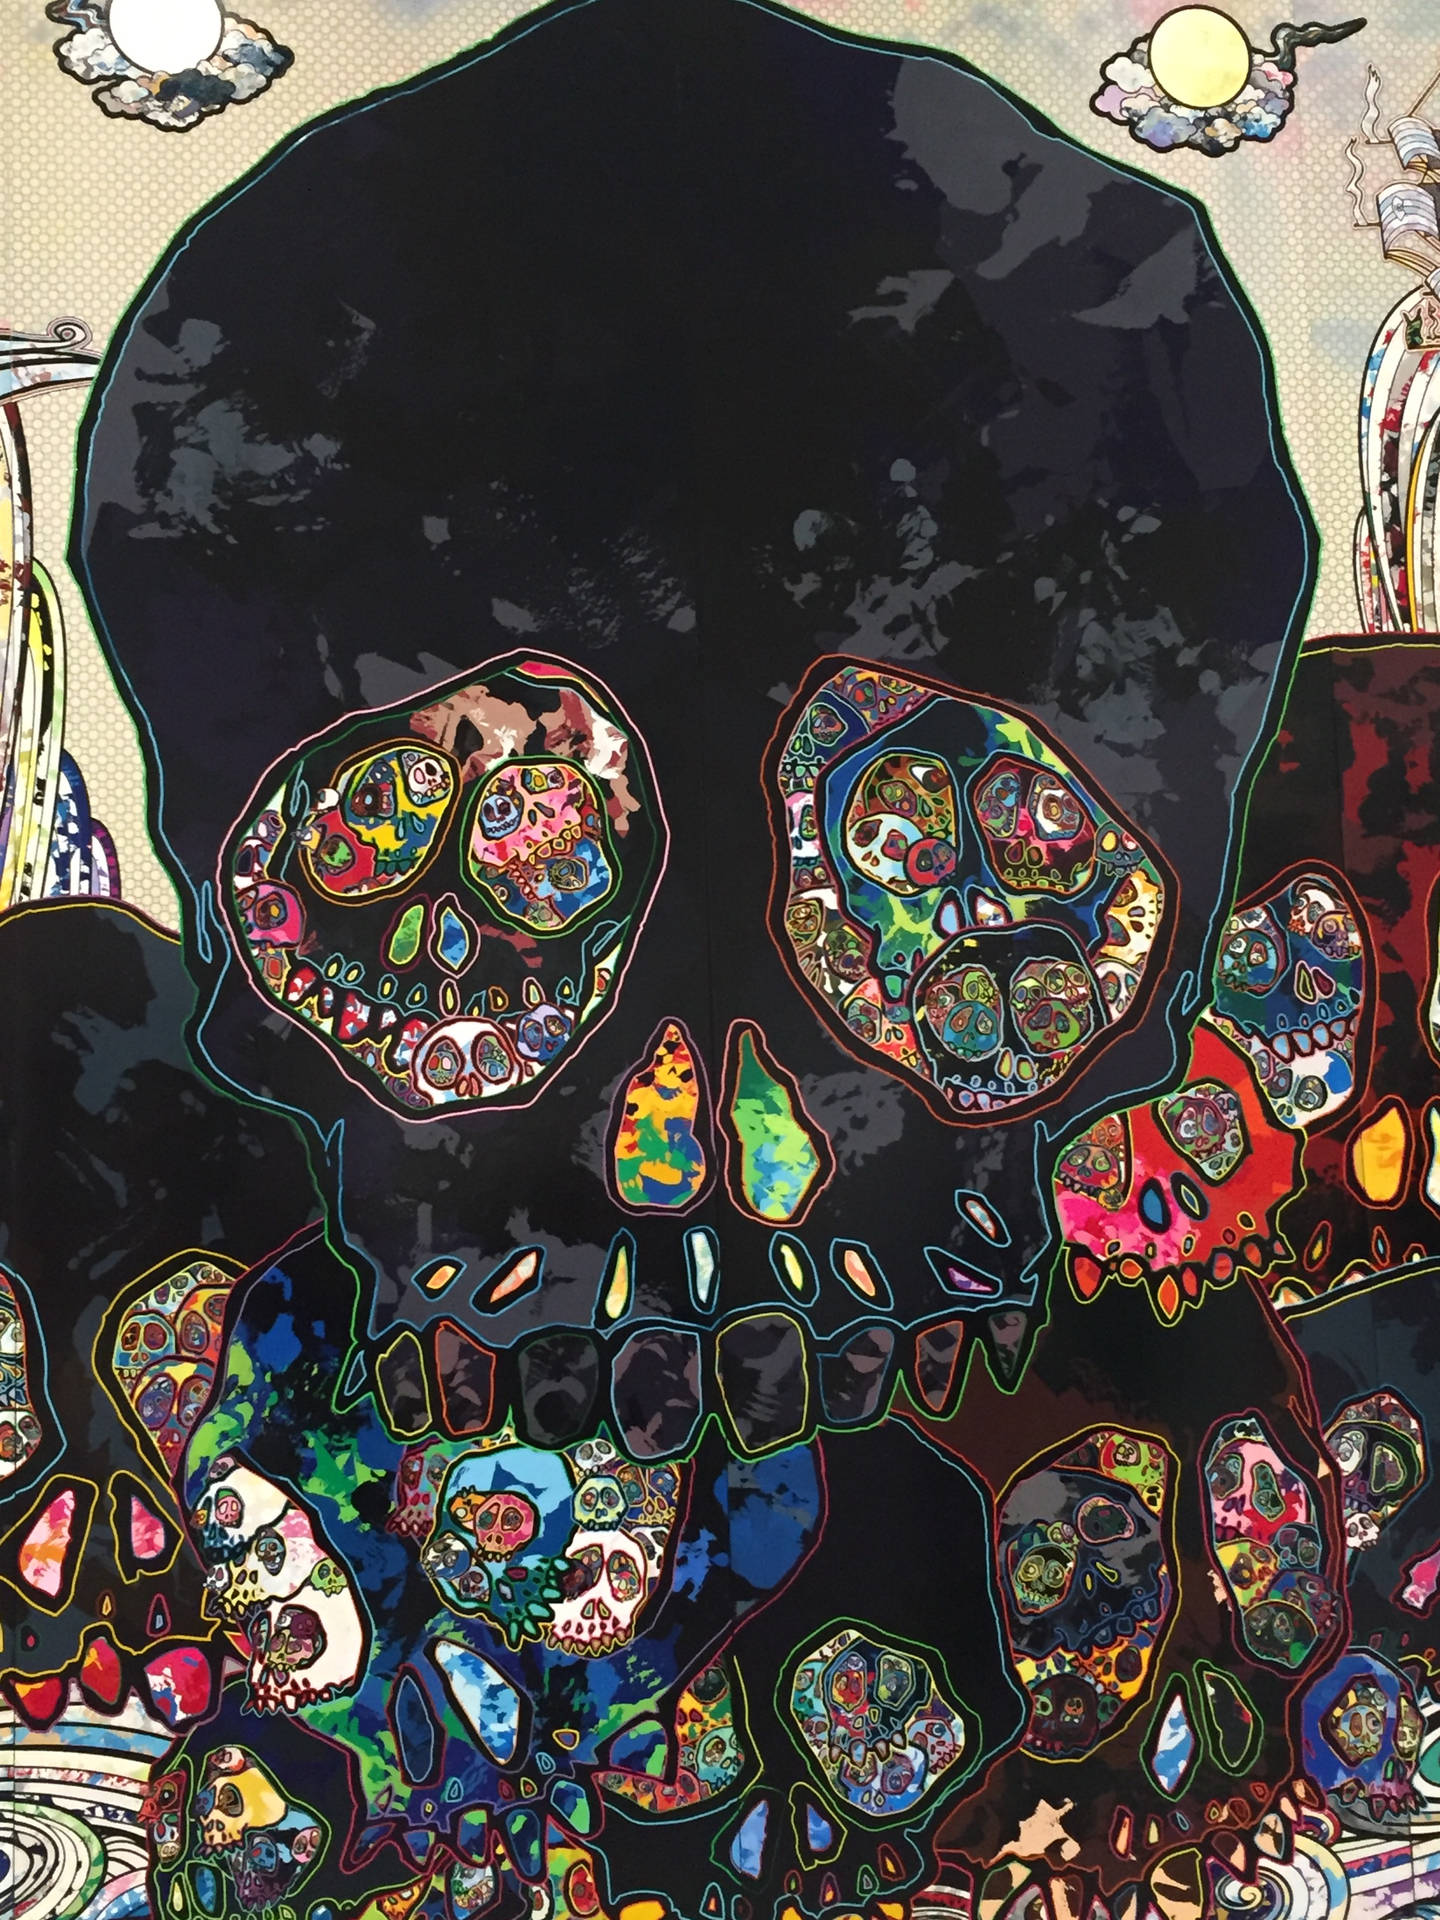 A Spooky, Bewitching Skull Art Wallpaper